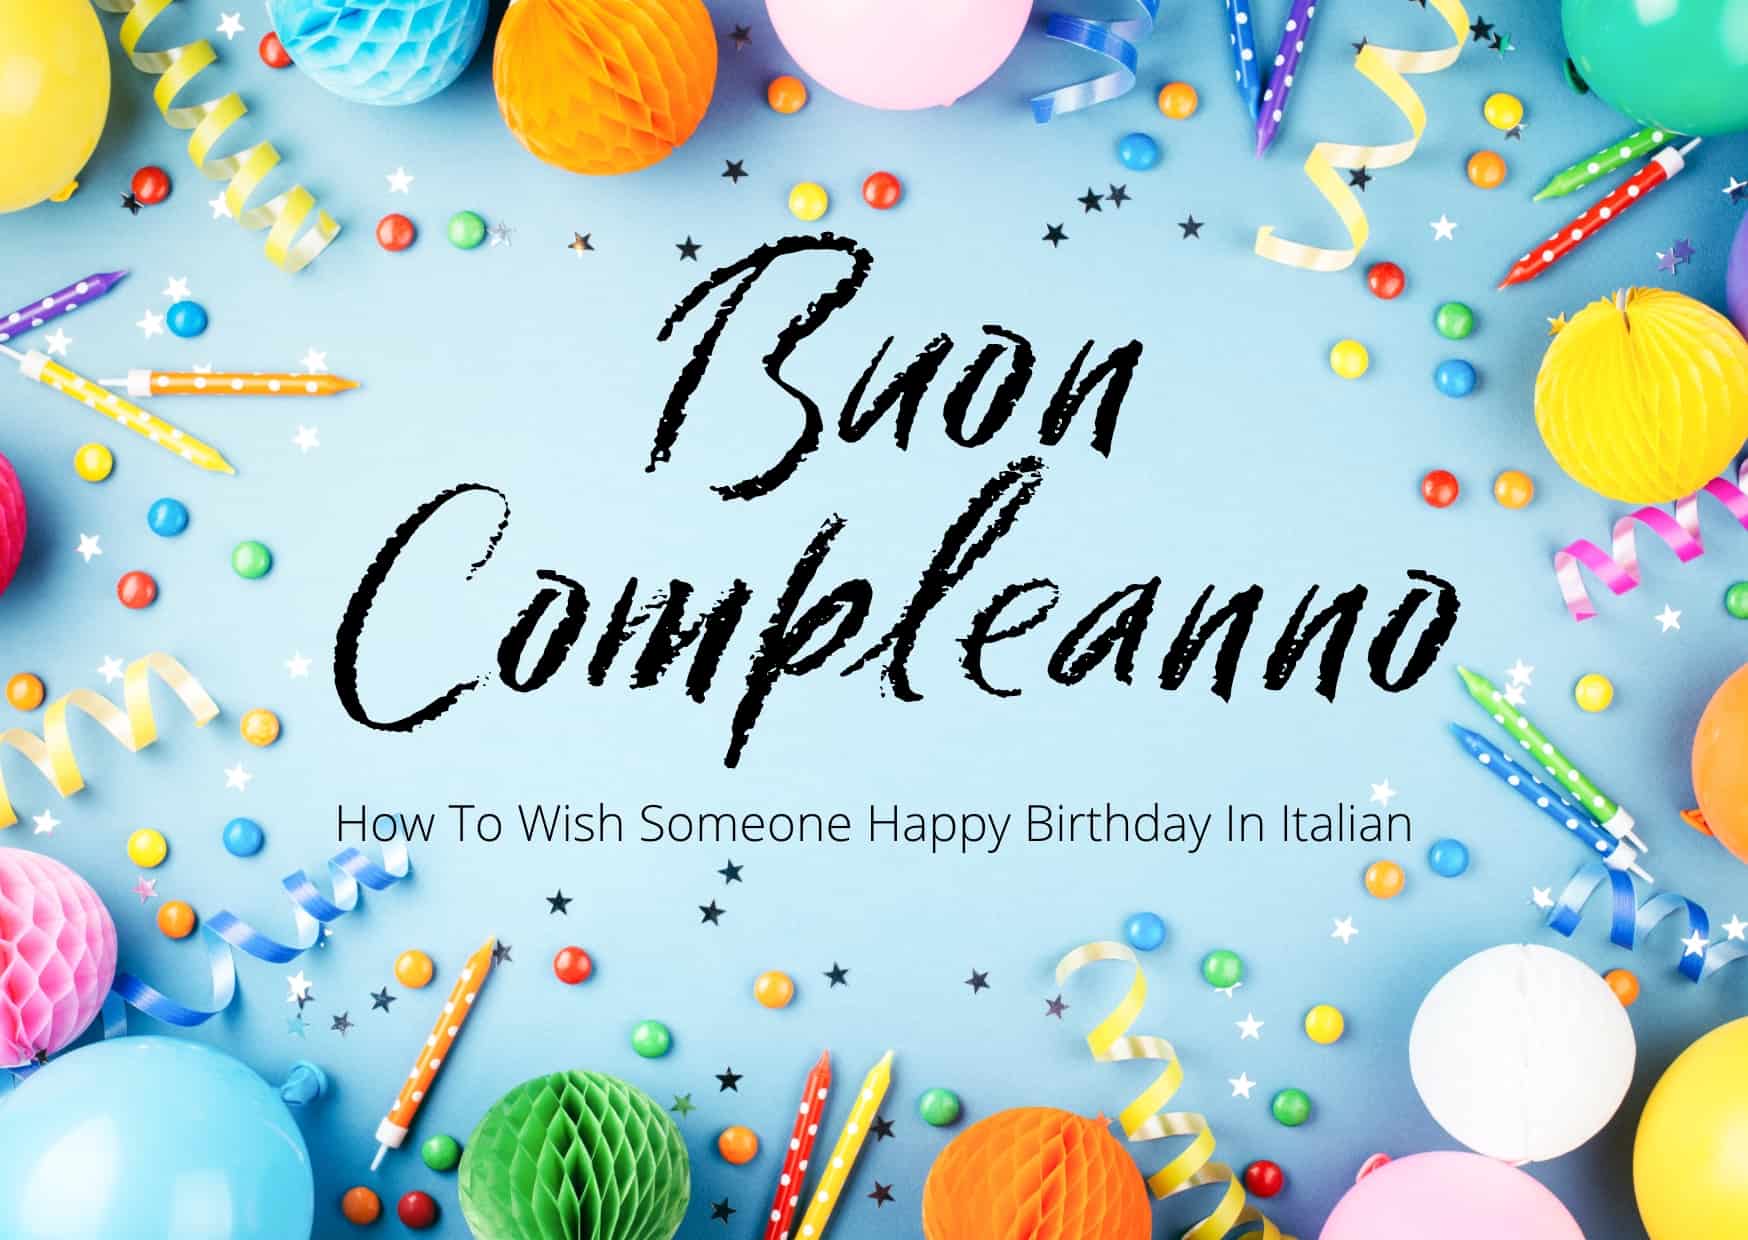 BUON COMPLEANNO - How To Wish Someone Happy Birthday In Italian - Getting To Know Italy